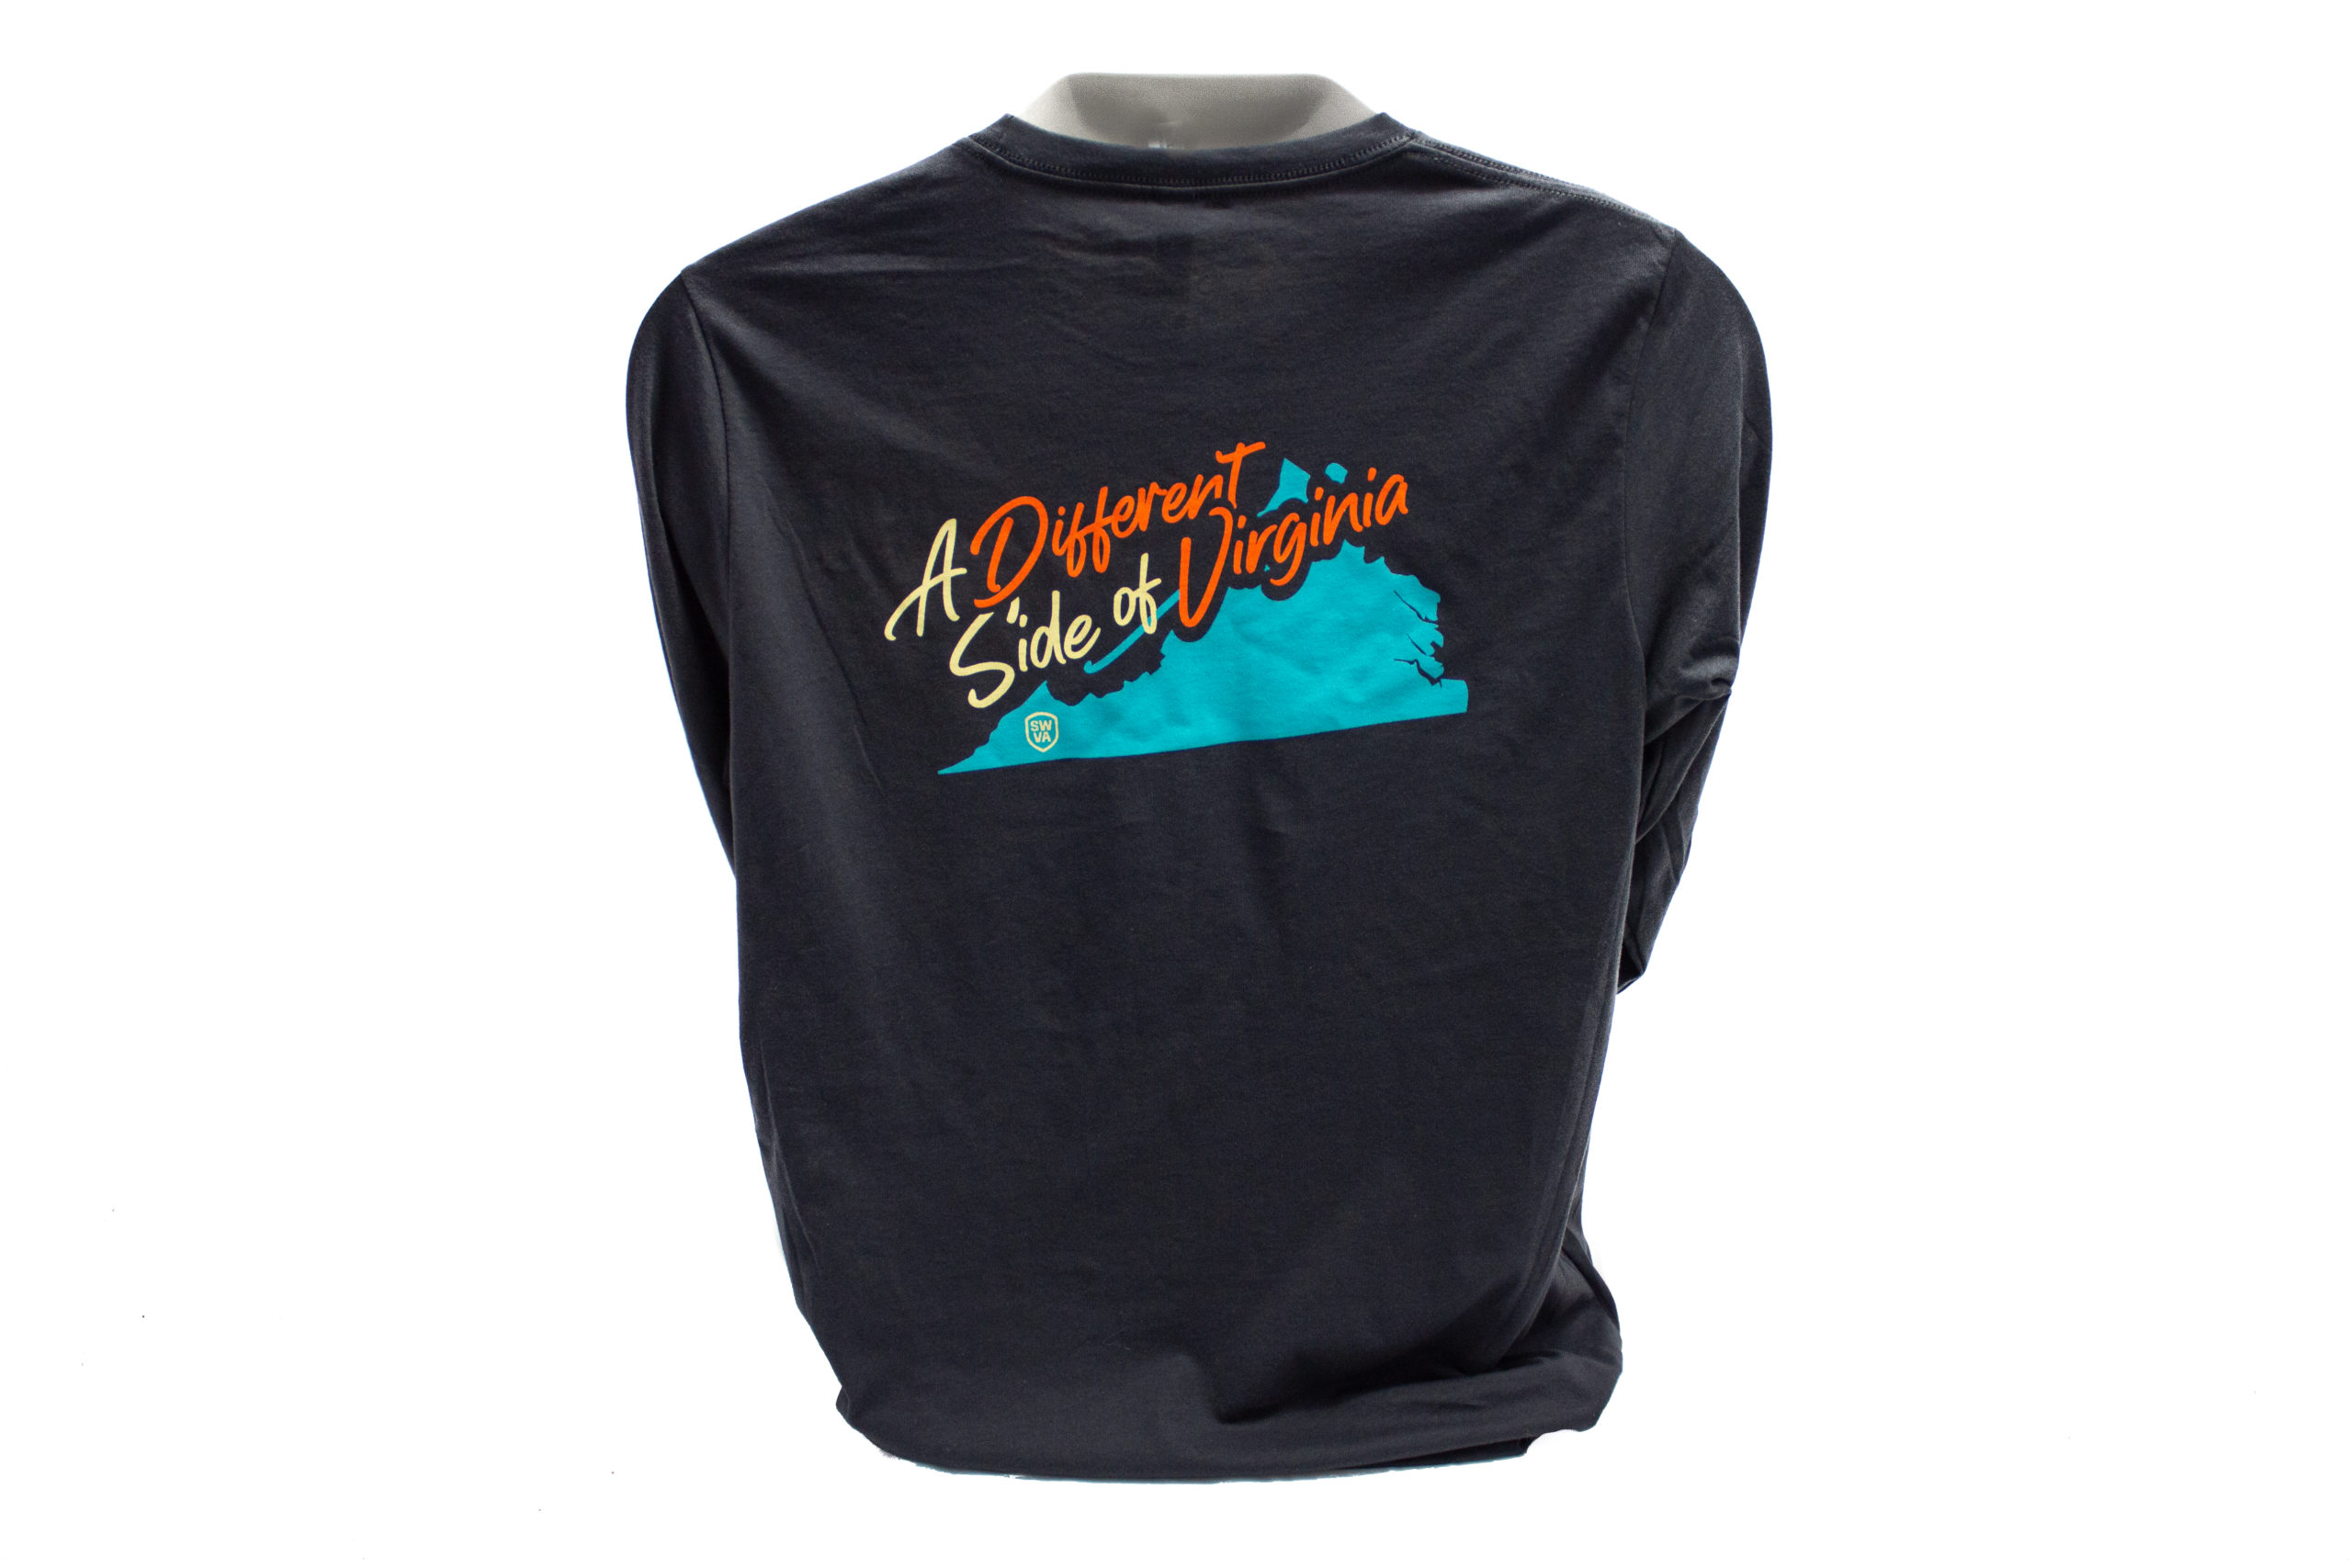 Gray t-shirt with 'A Different Side of Virginia' brand statement with outline of Virginia in teal